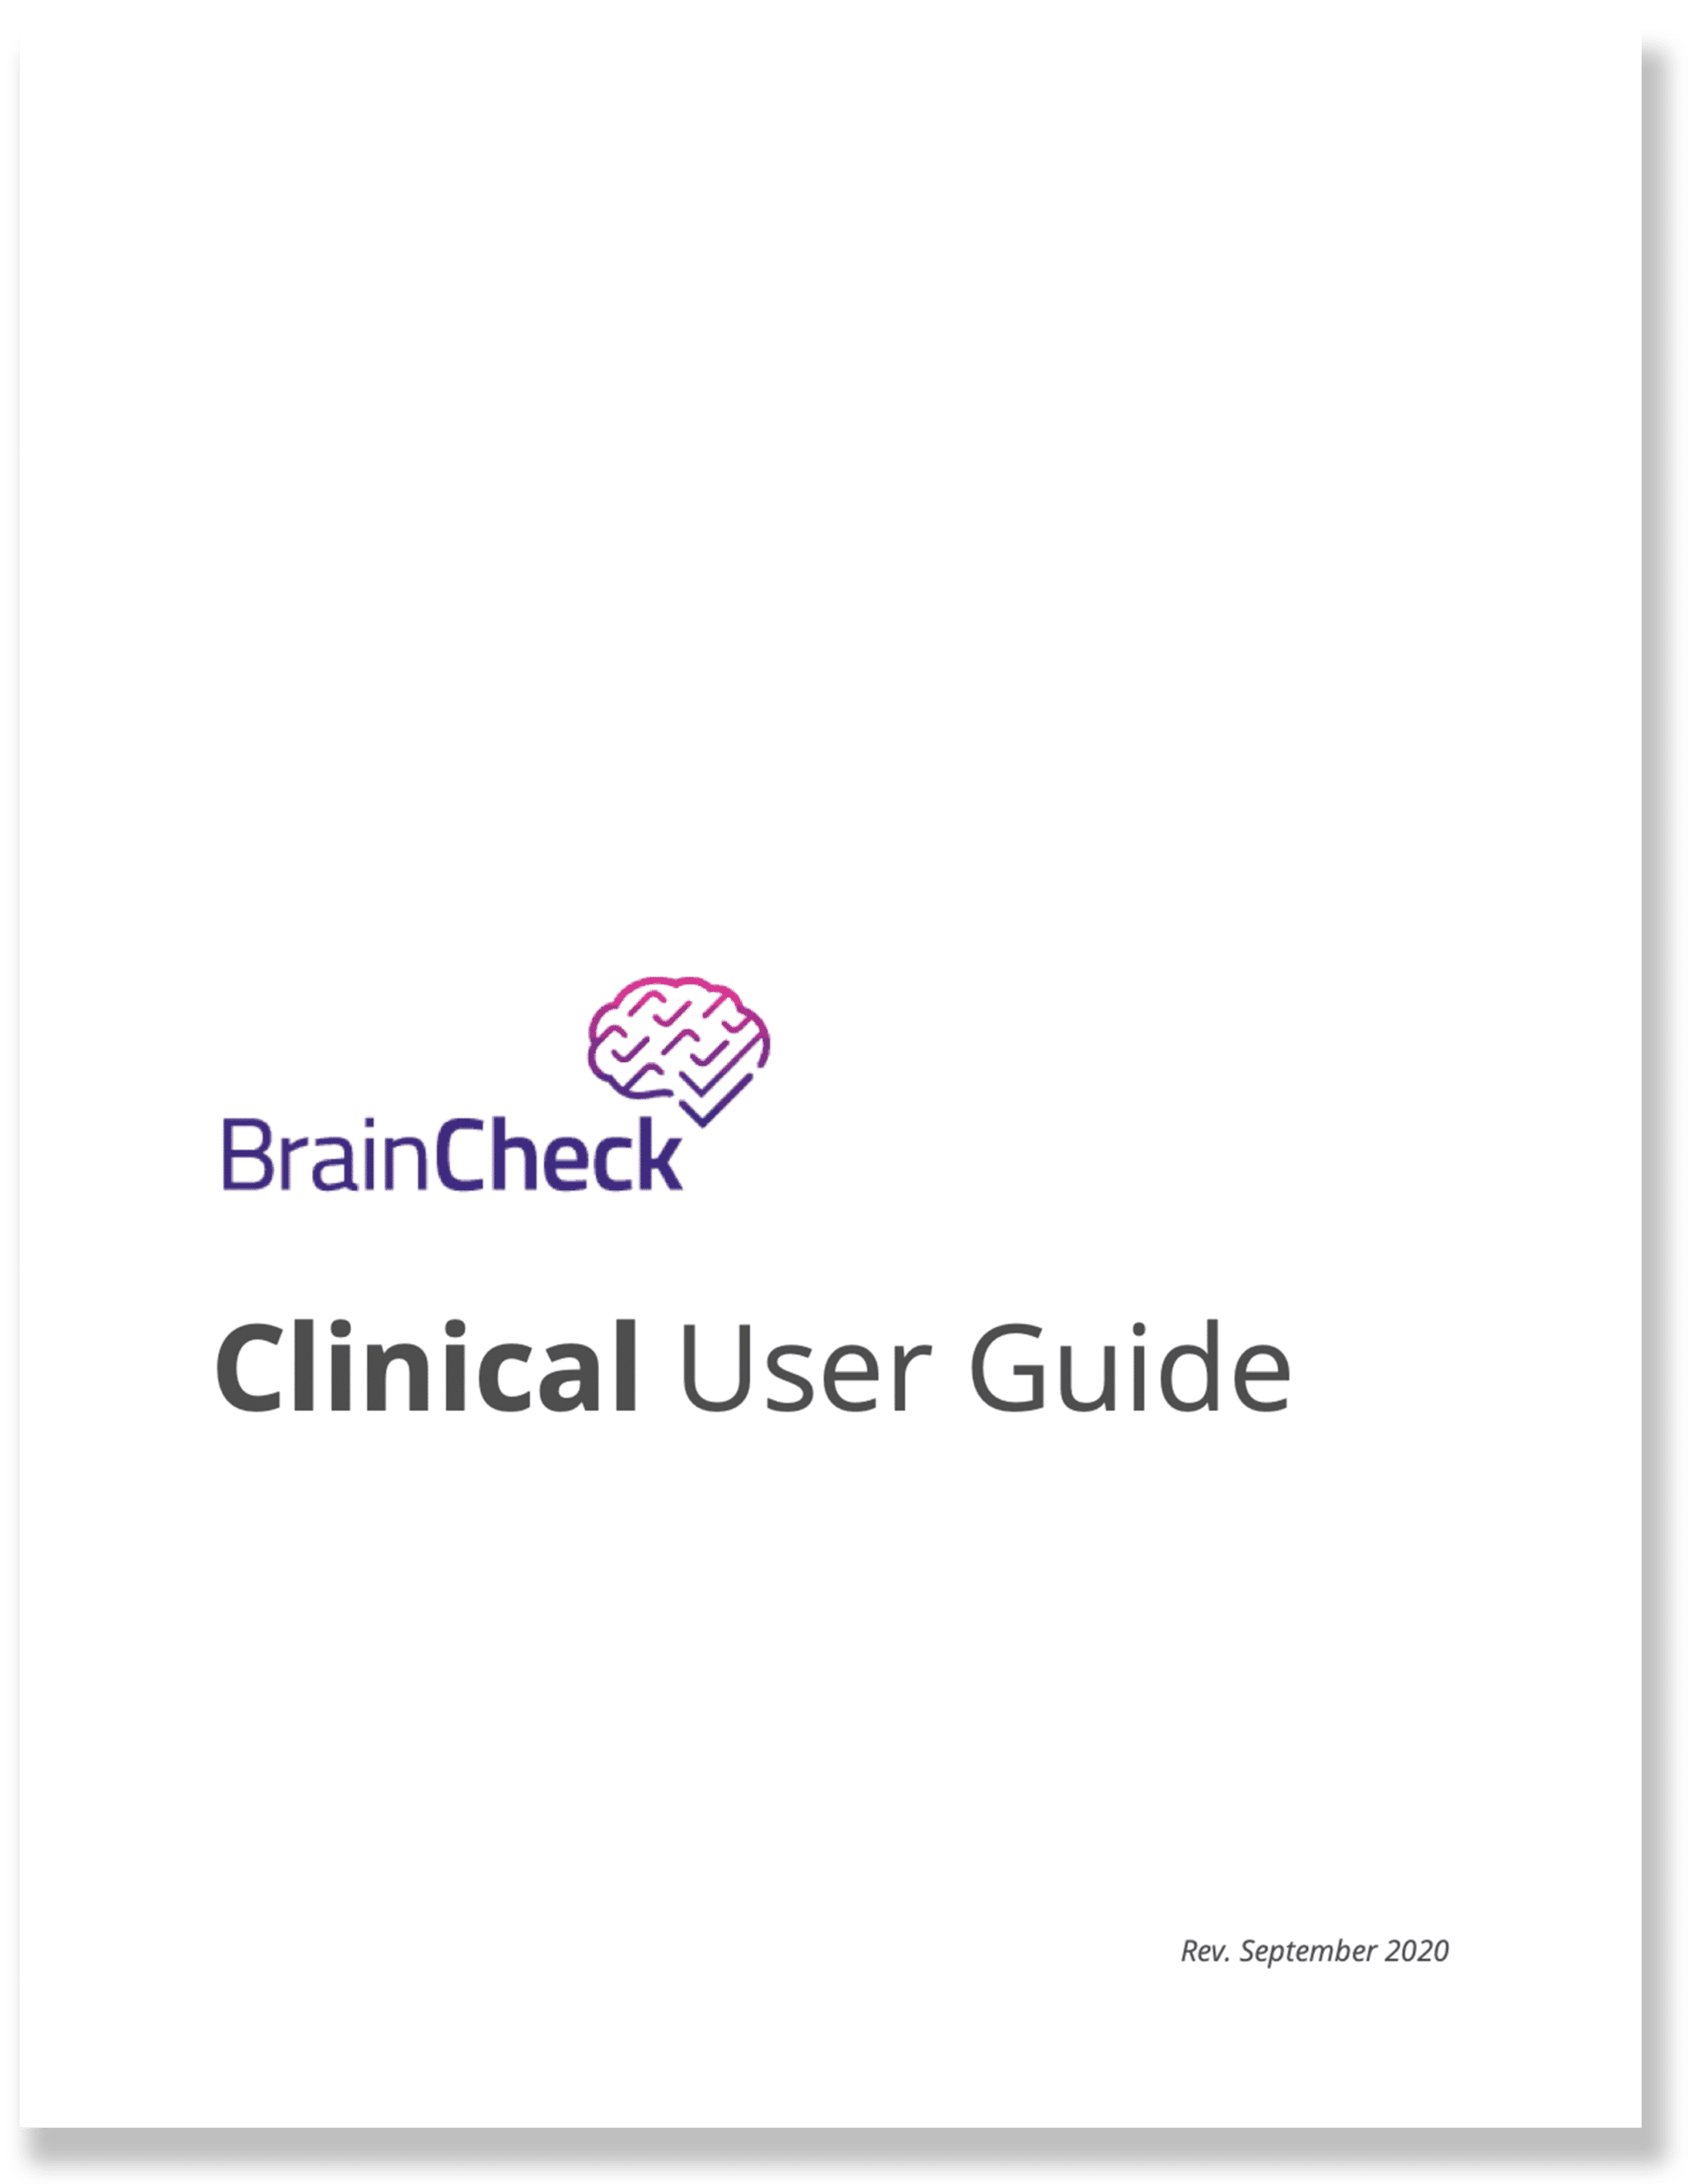 BrainCheck Clinical User Guide